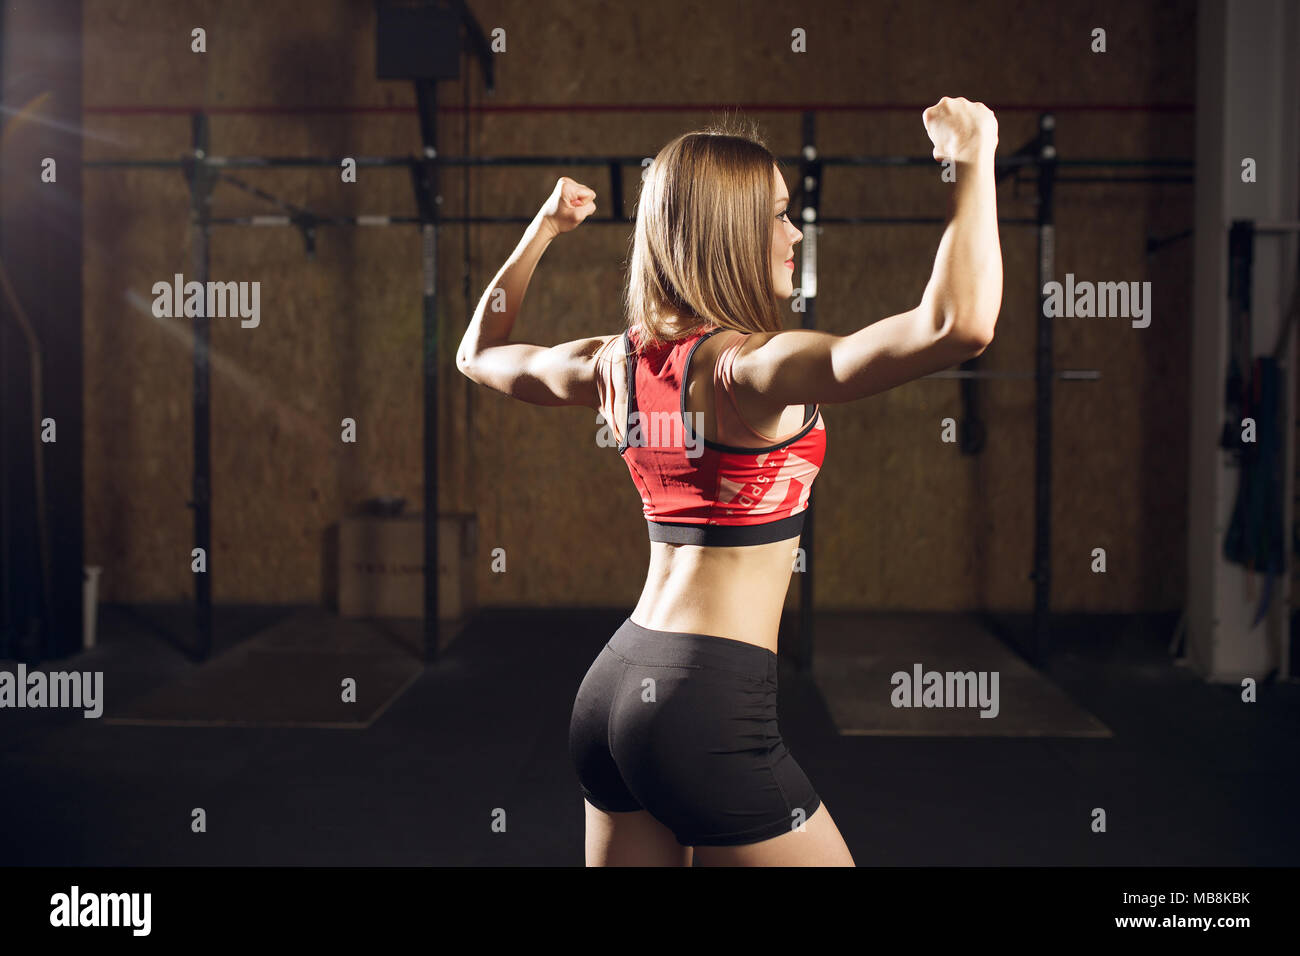 Portrait from back of sports woman showing biceps Stock Photo